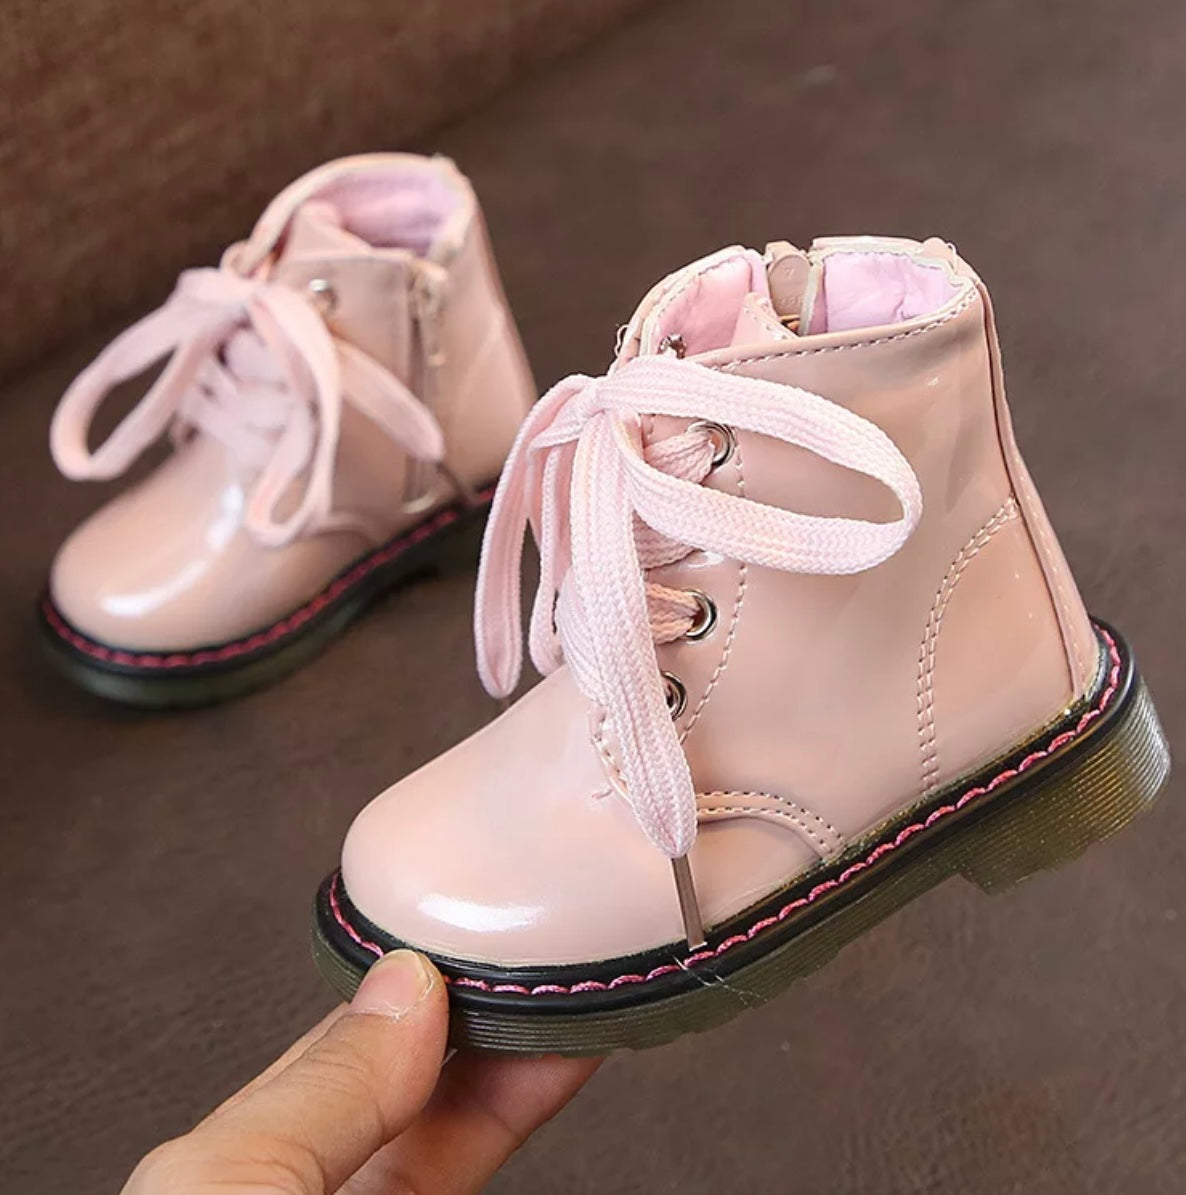 Toddler Pink Boots